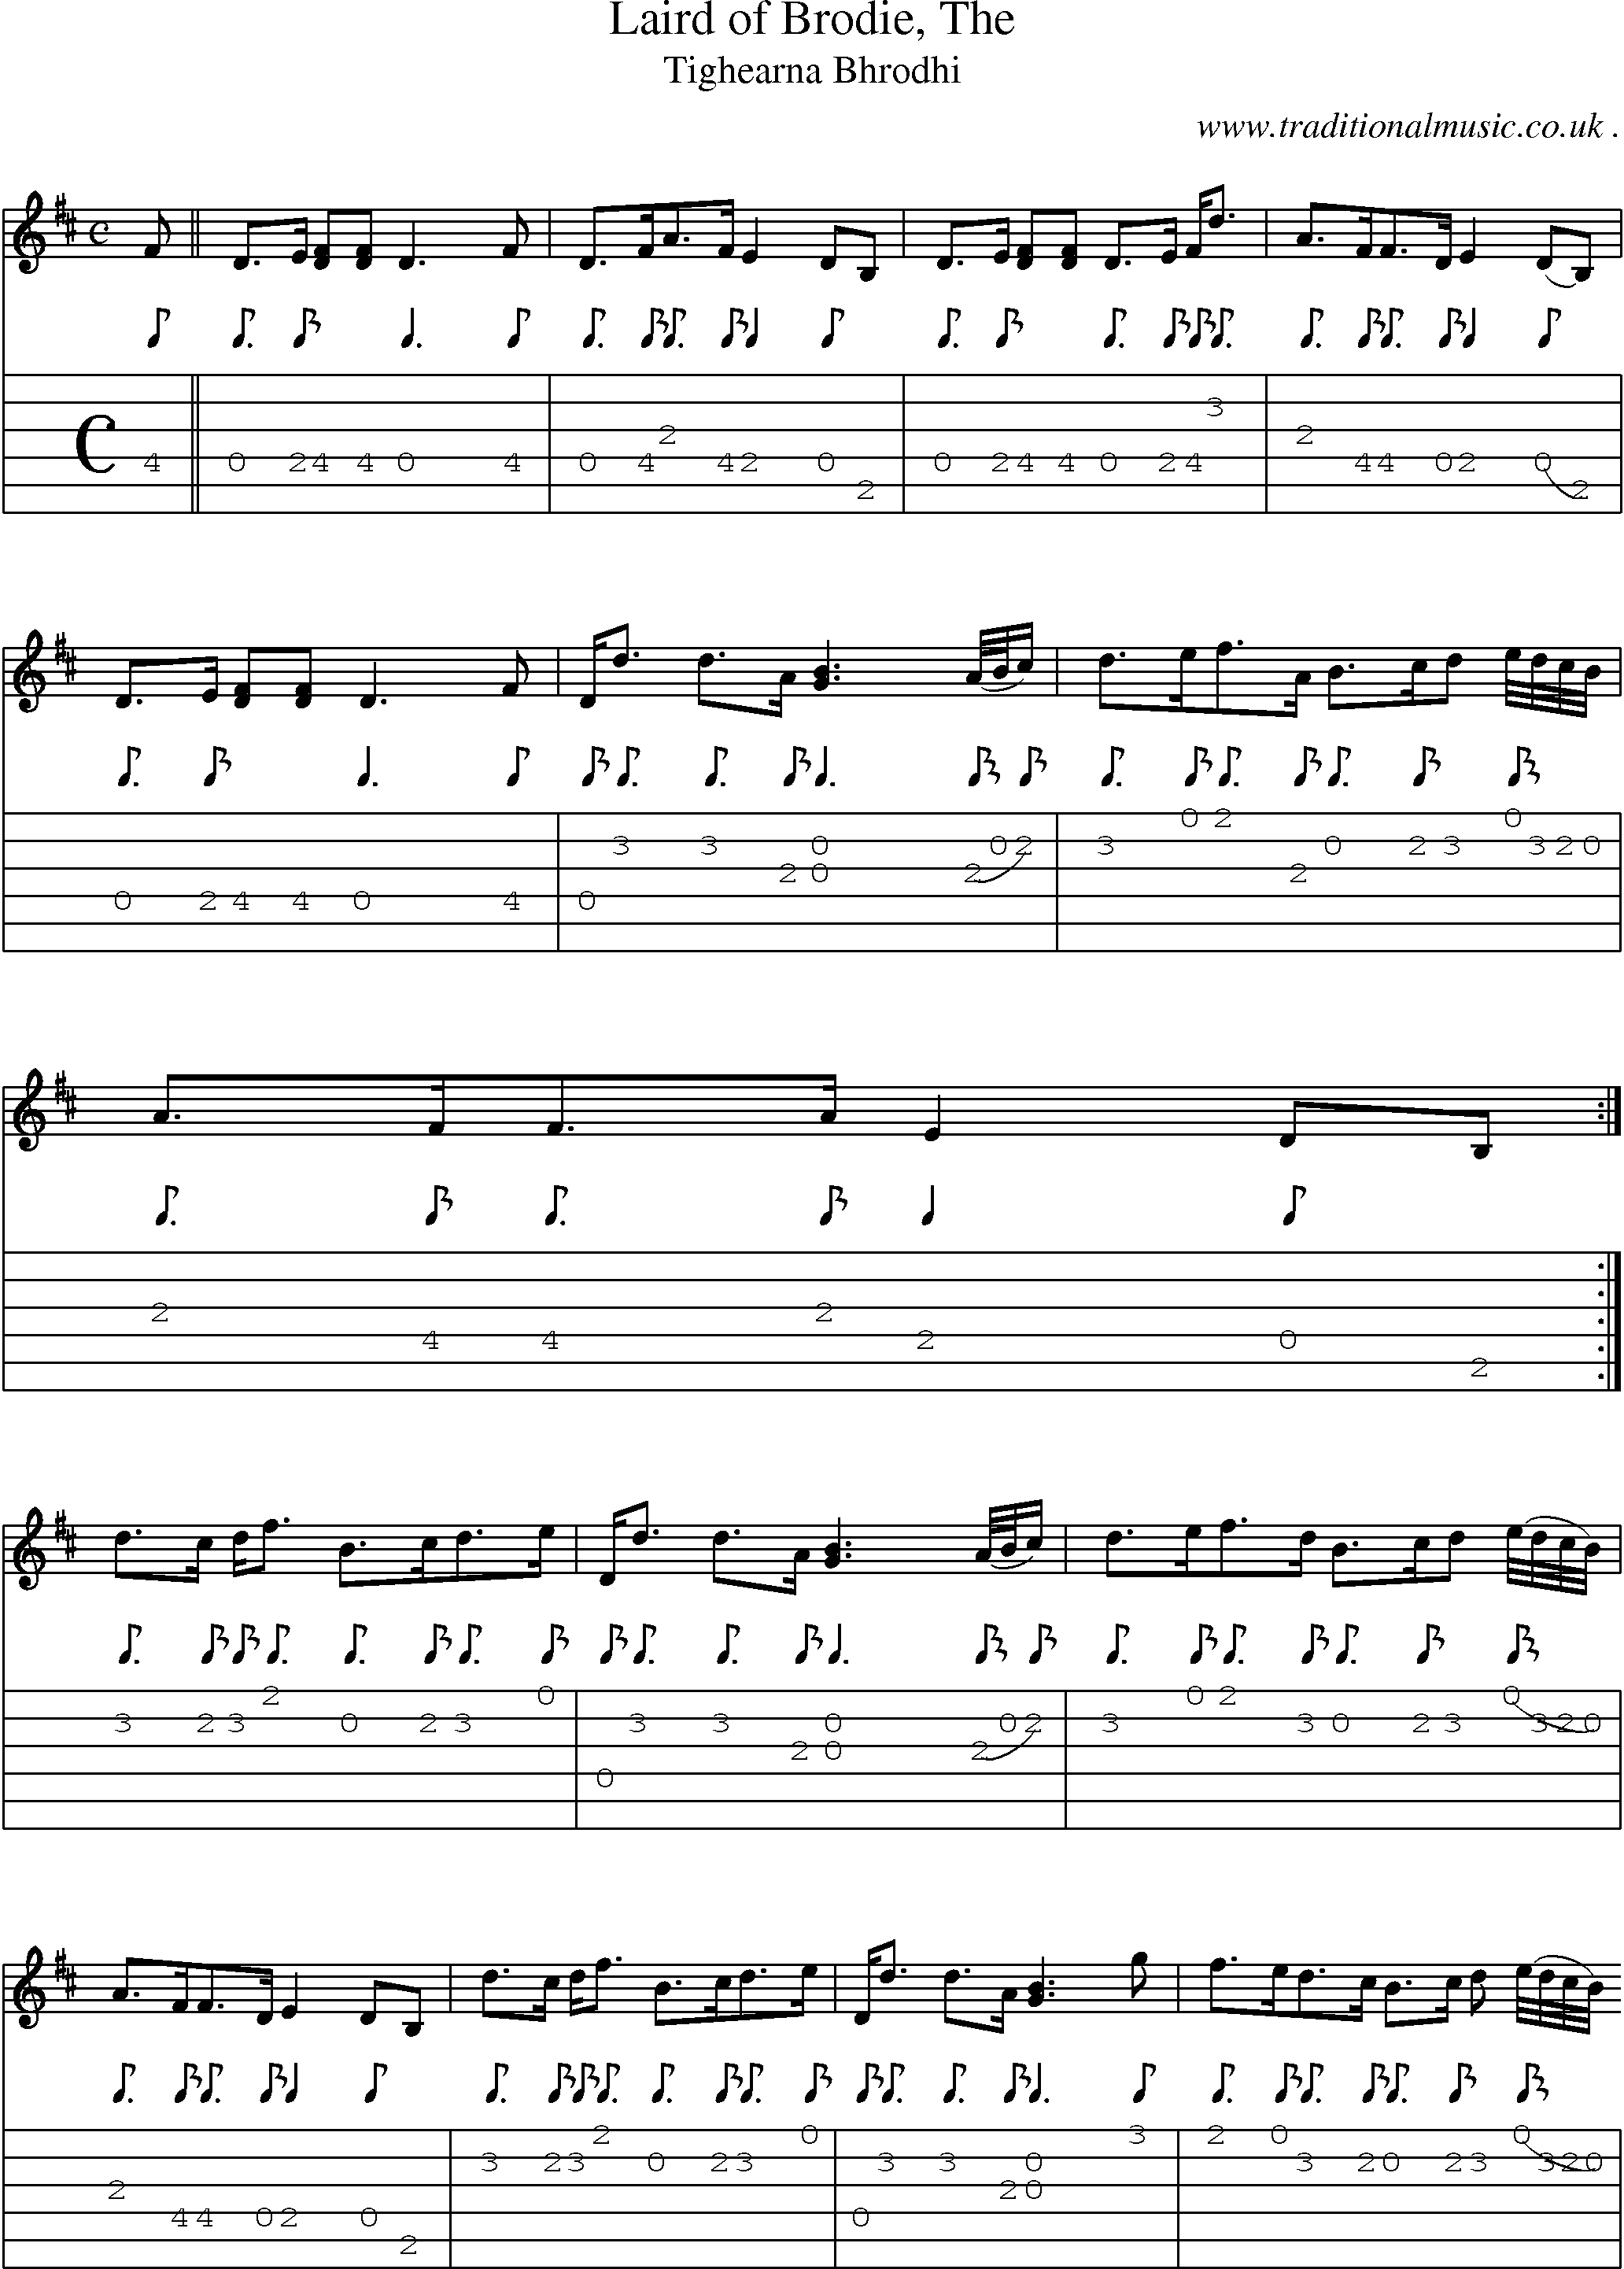 Sheet-music  score, Chords and Guitar Tabs for Laird Of Brodie The